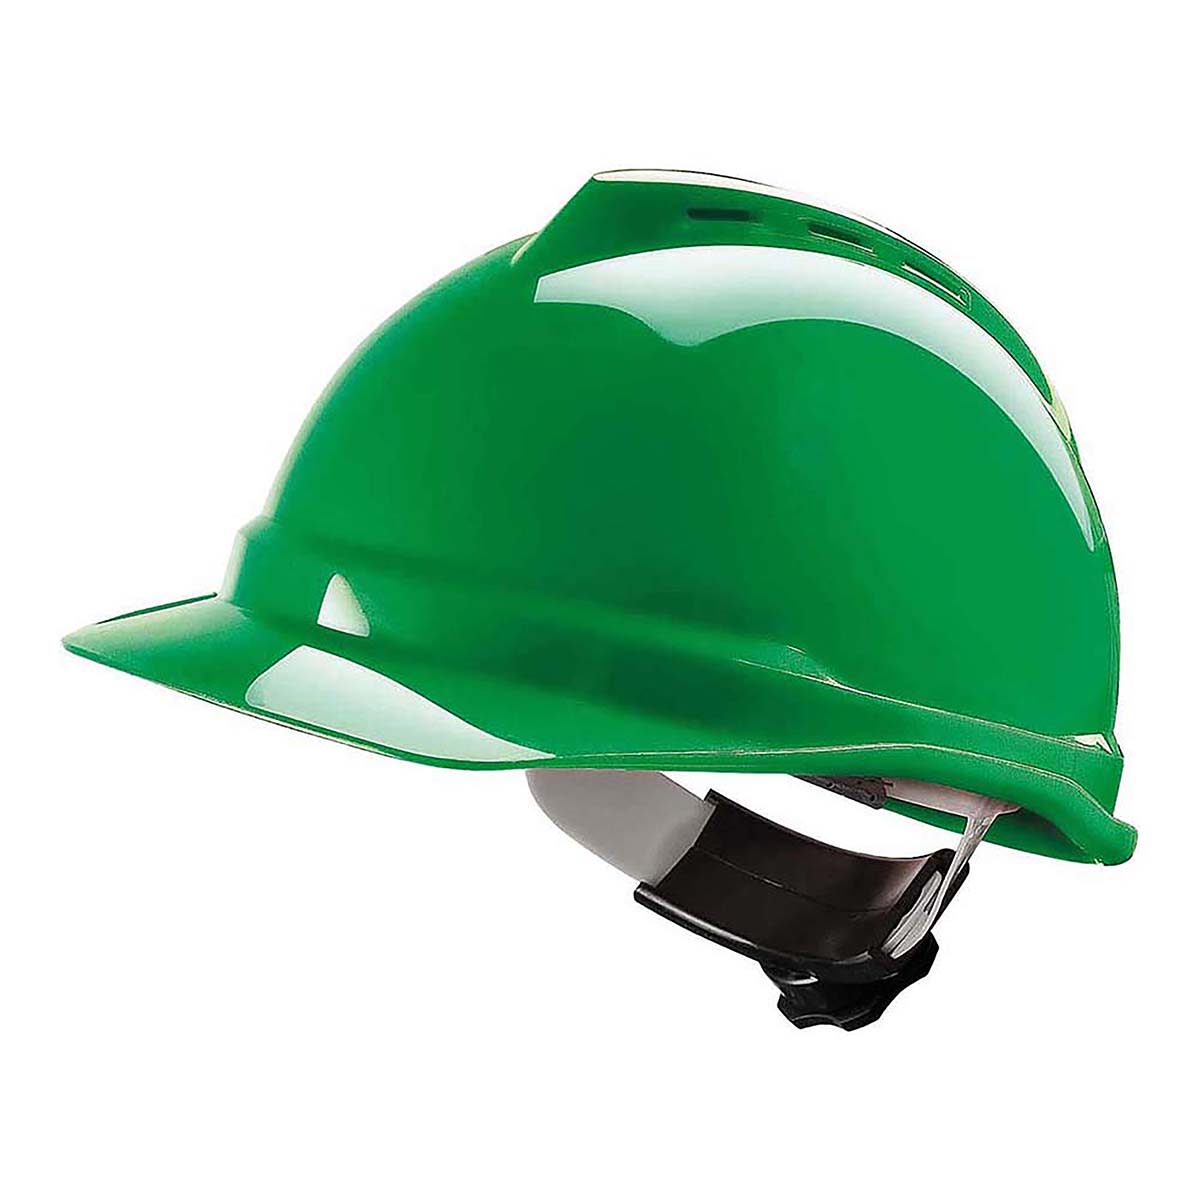 A Guide to Hard Hats and Safety Helmets